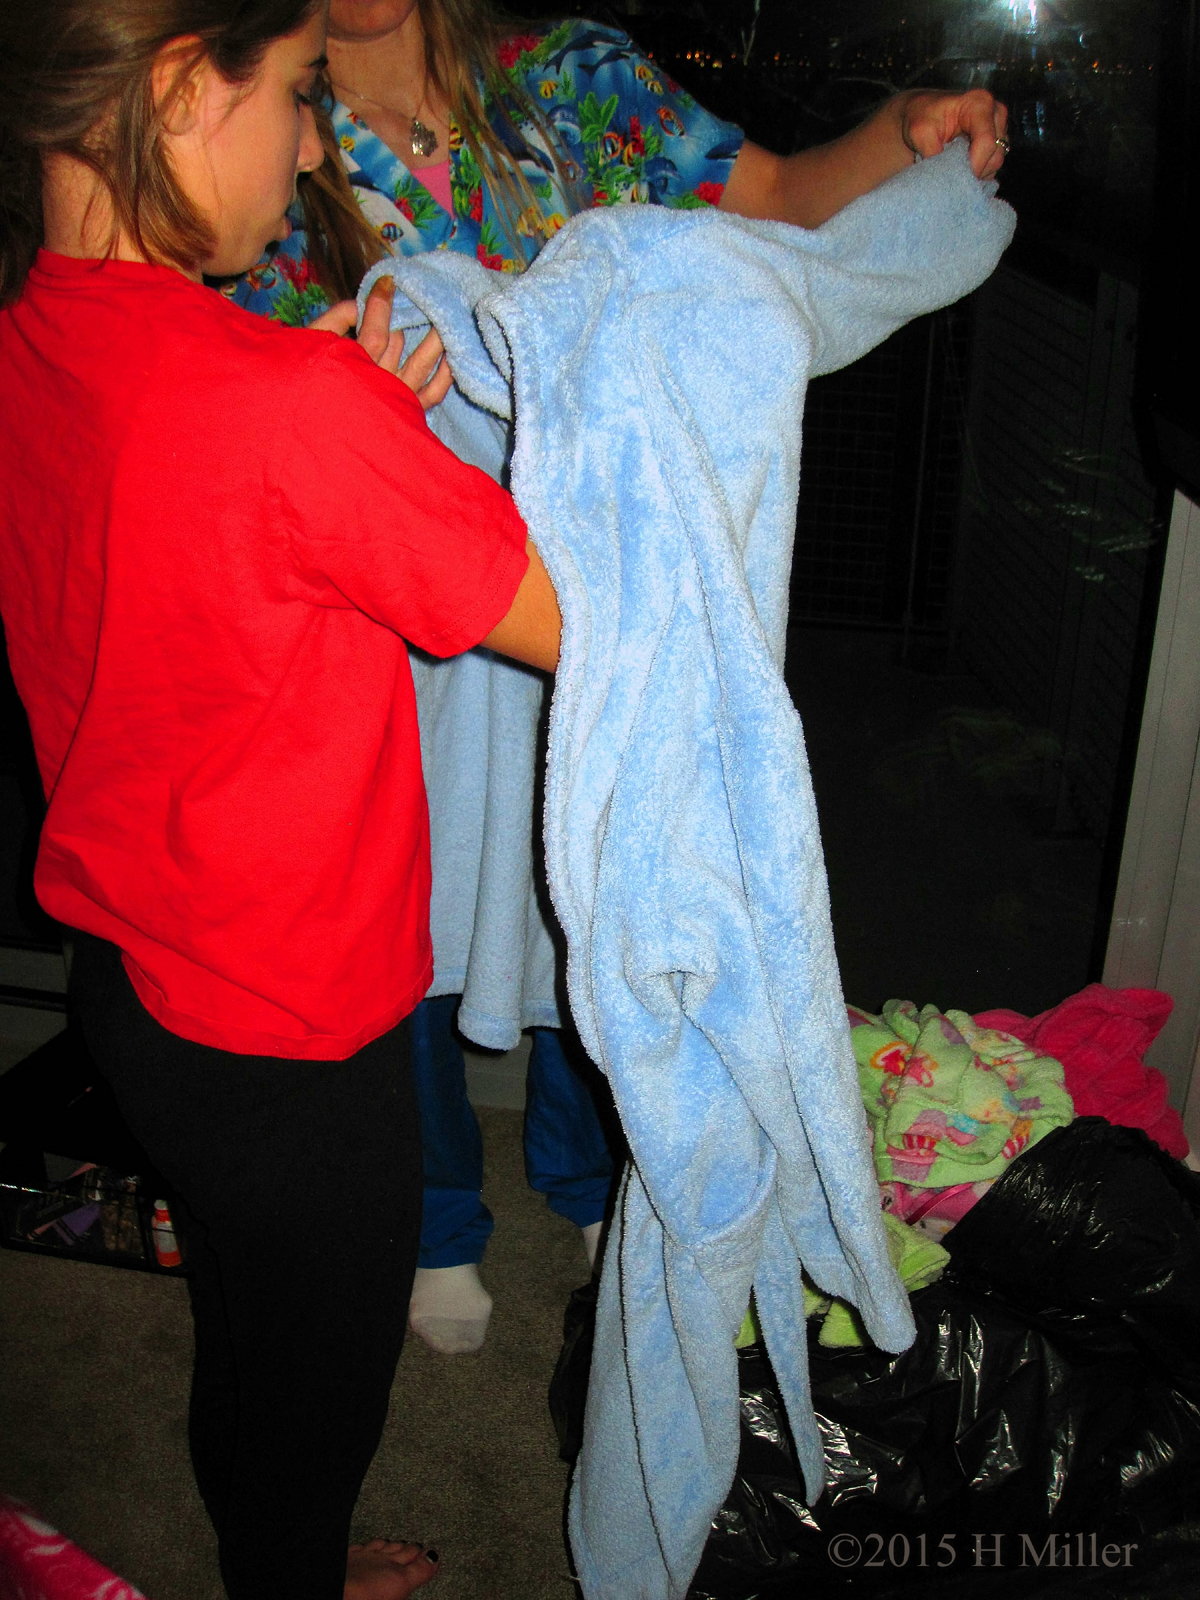 Putting On A Kids Spa Party Robe. 